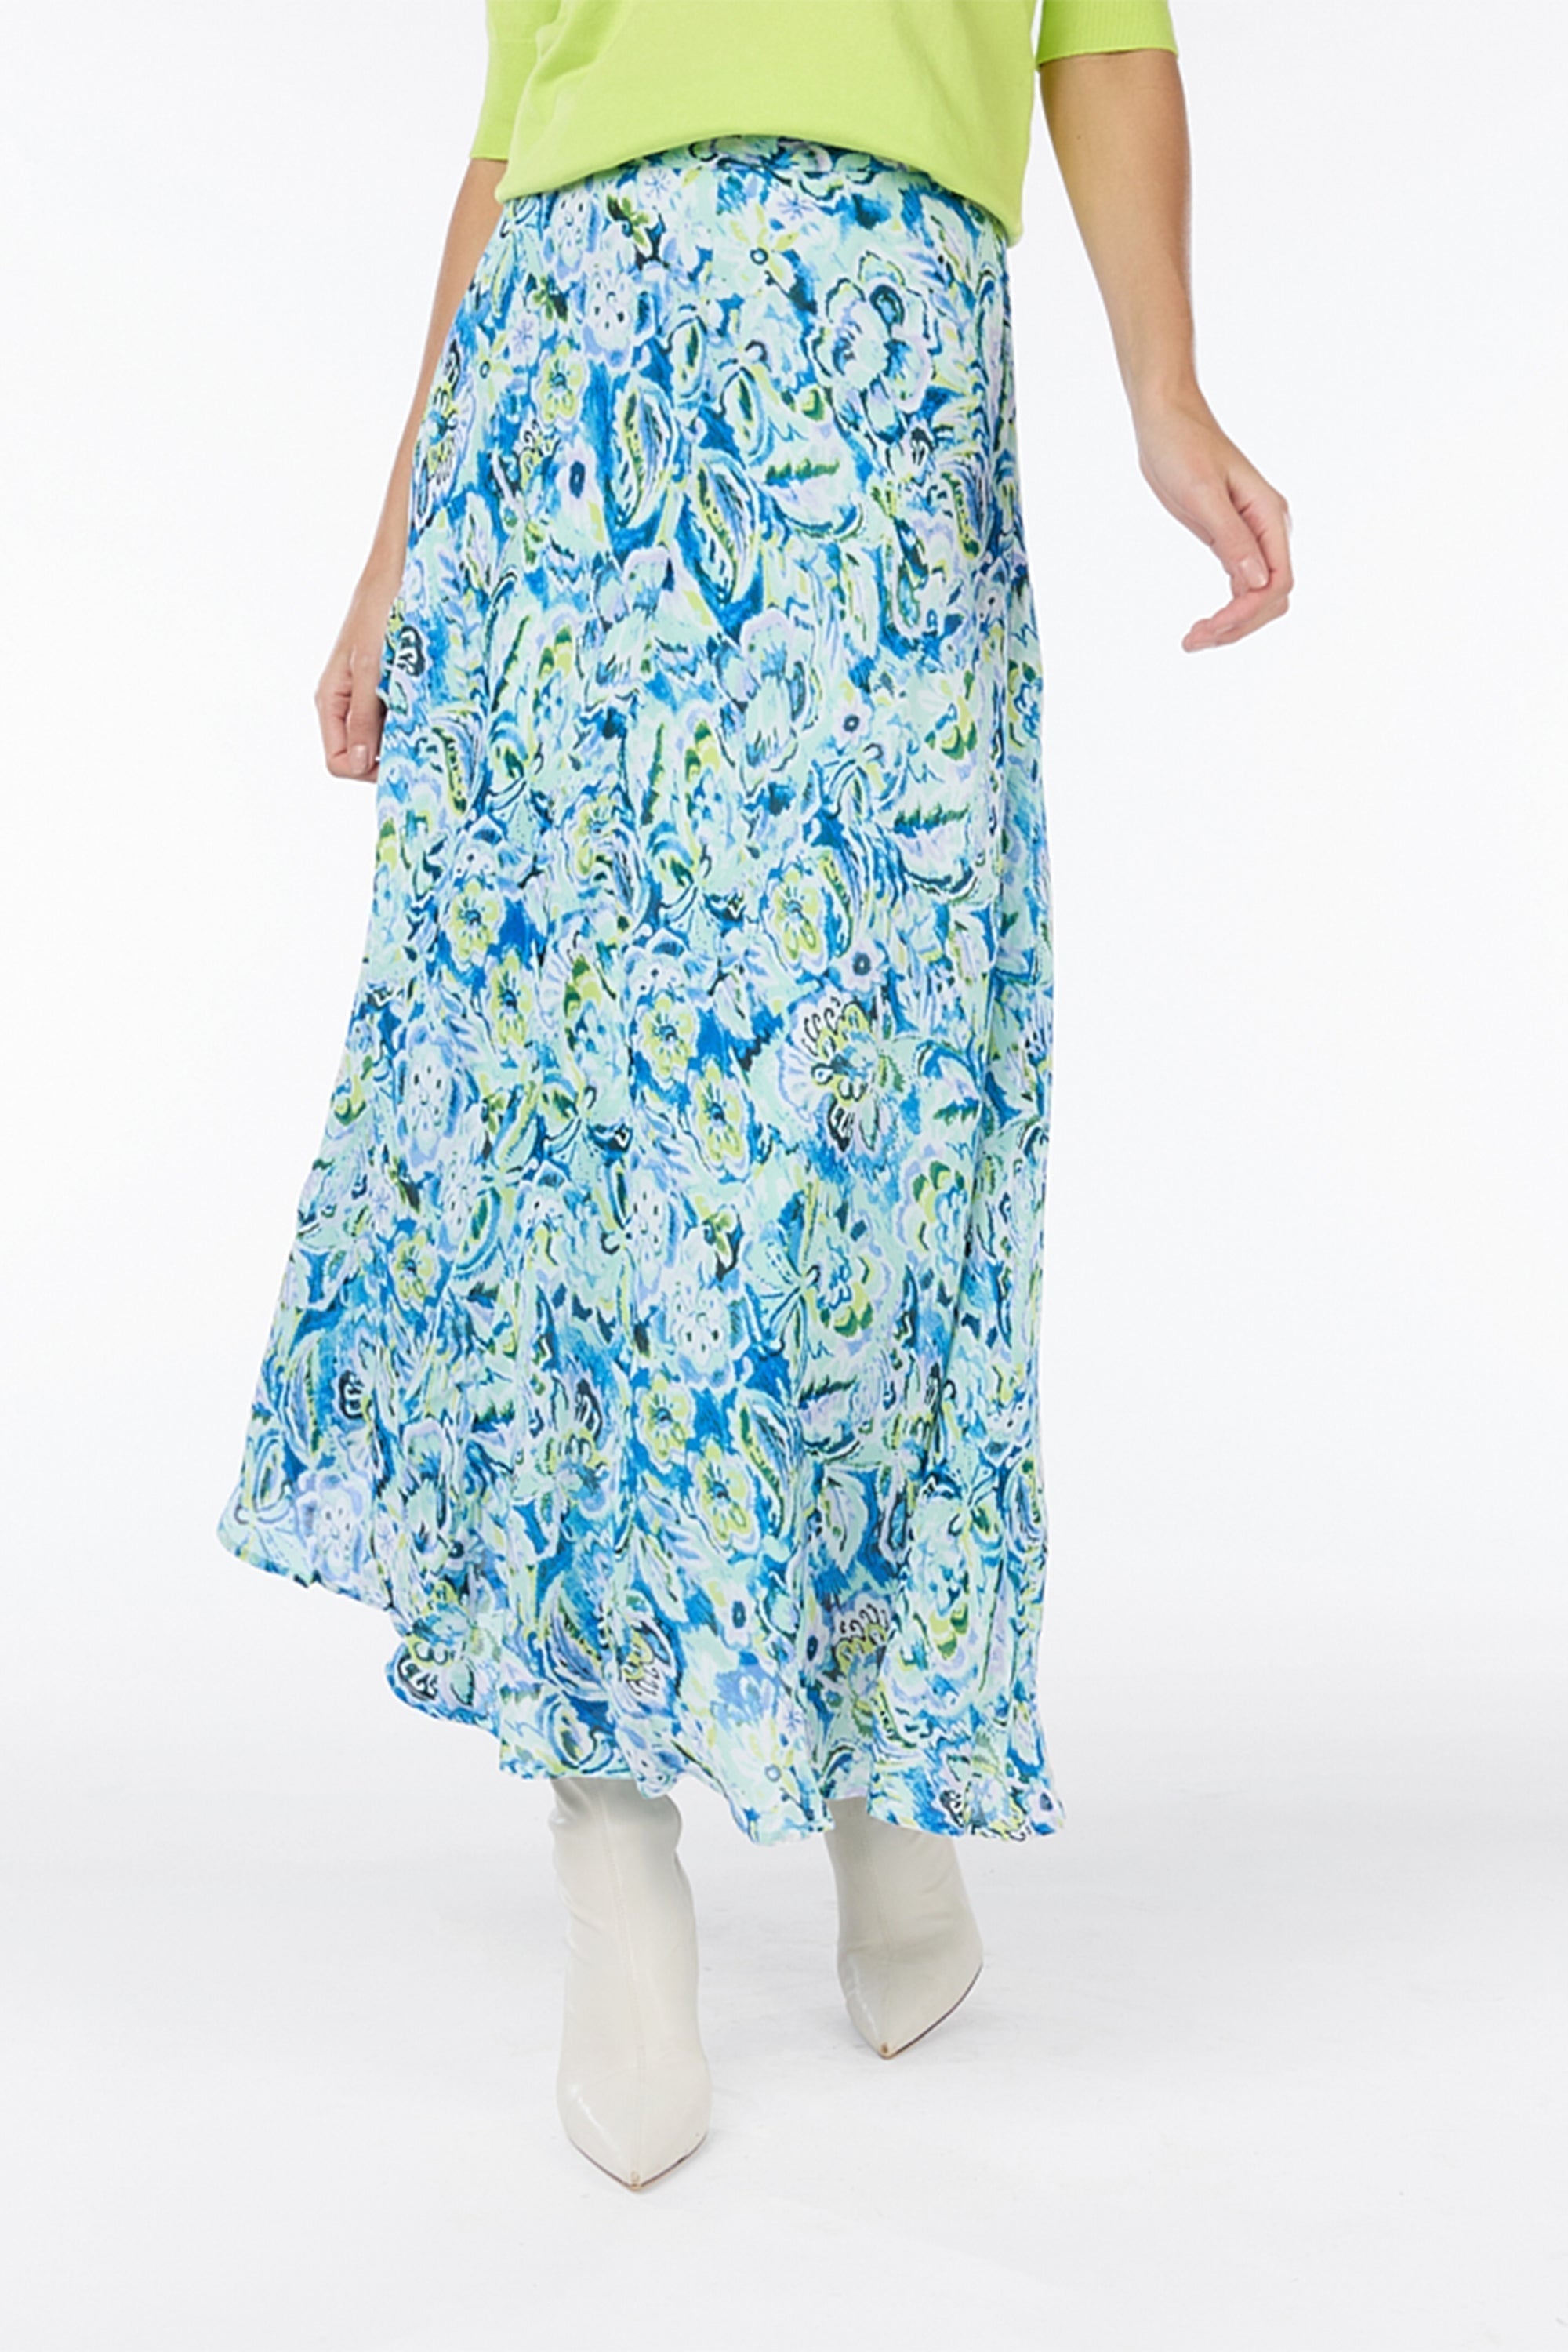 Front view of Esqulao (sp2415008) Blue Floral Chiffon skirt